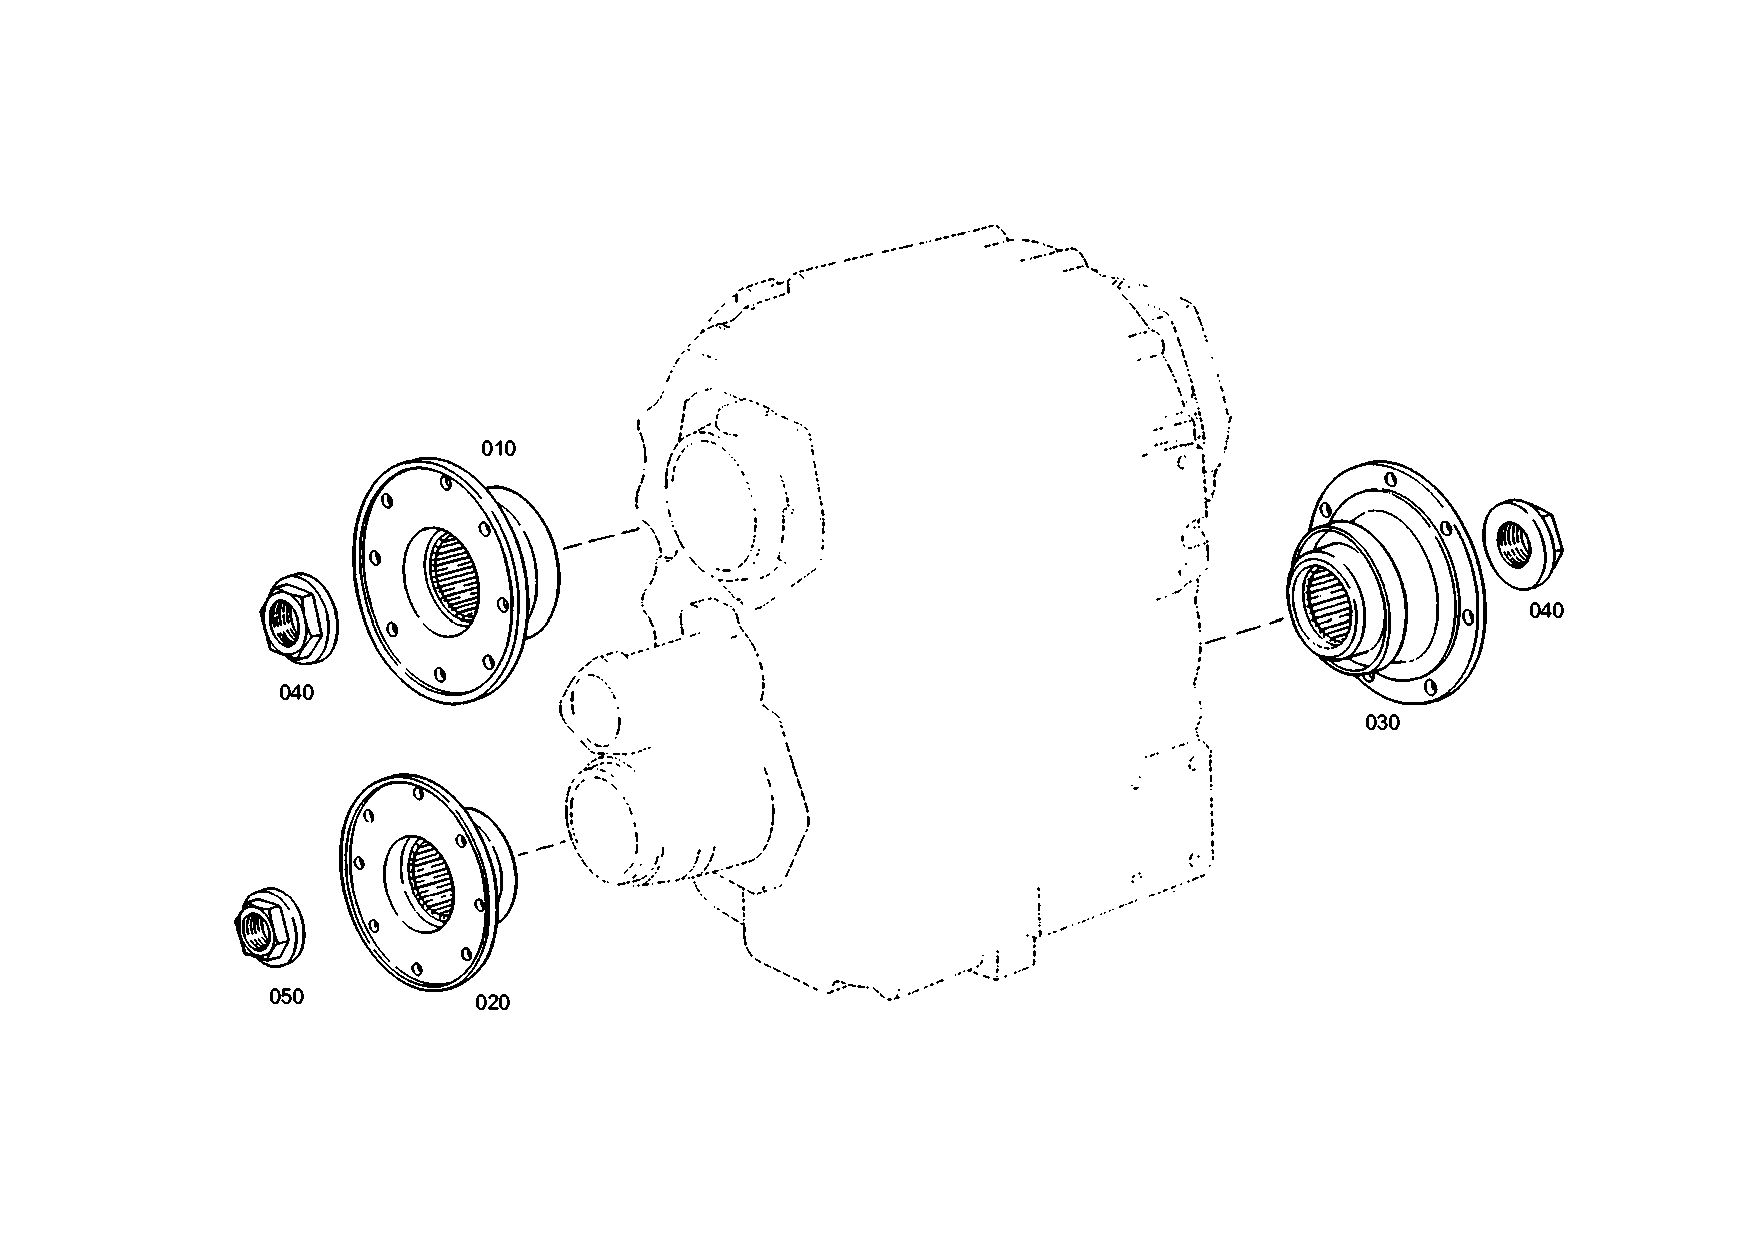 drawing for MARMON Herring MVG121052 - FLANGE (figure 1)